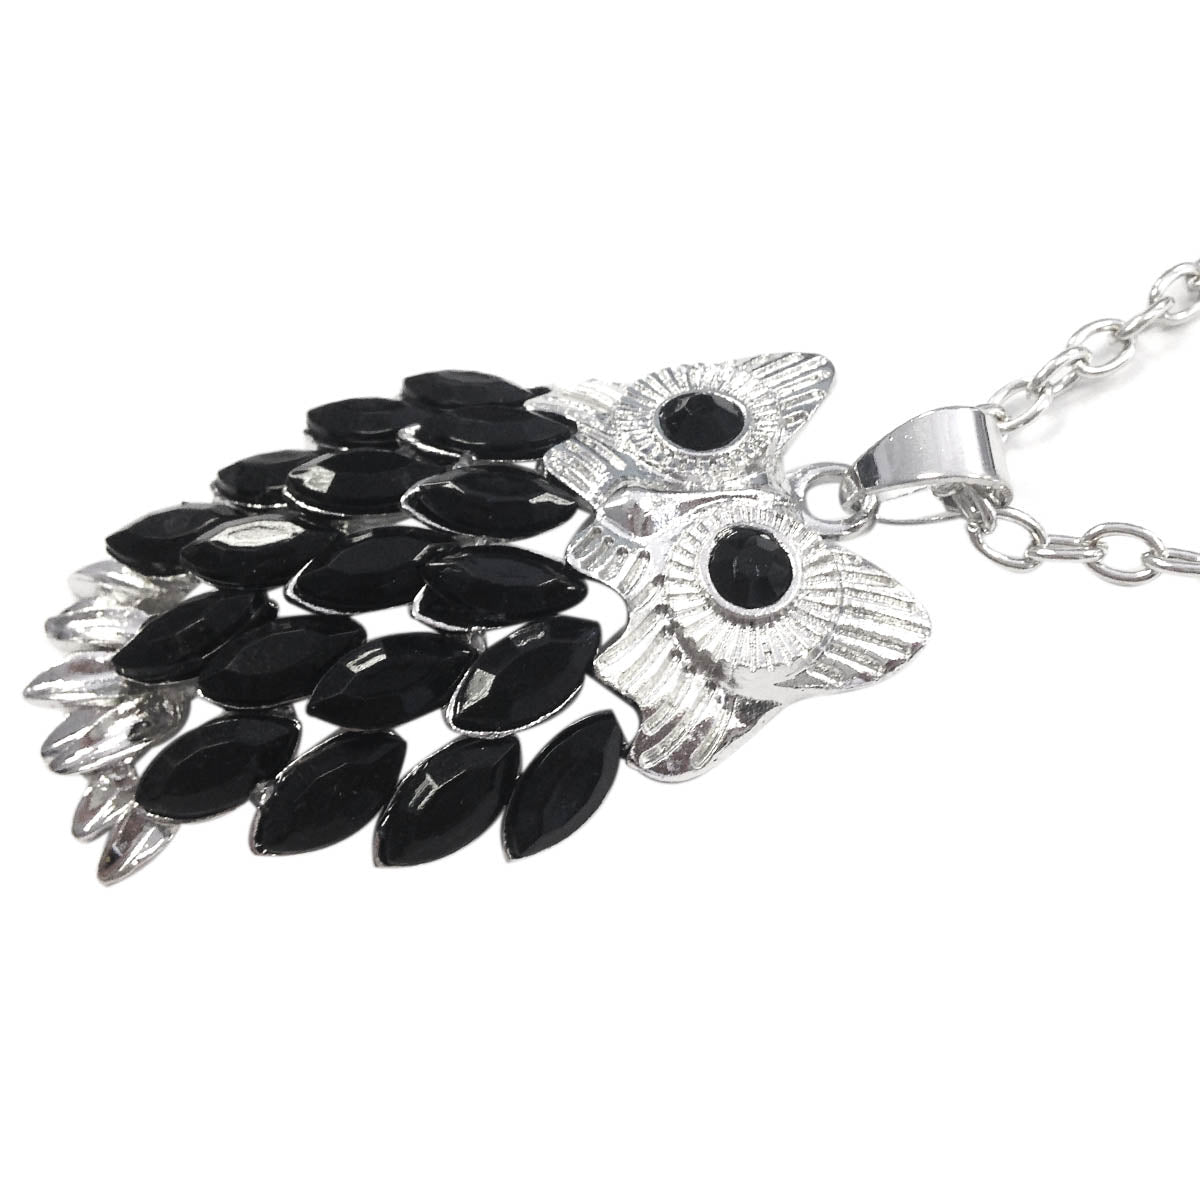 Wrapables Stylish Crystal Feather Owl Pendant Necklace